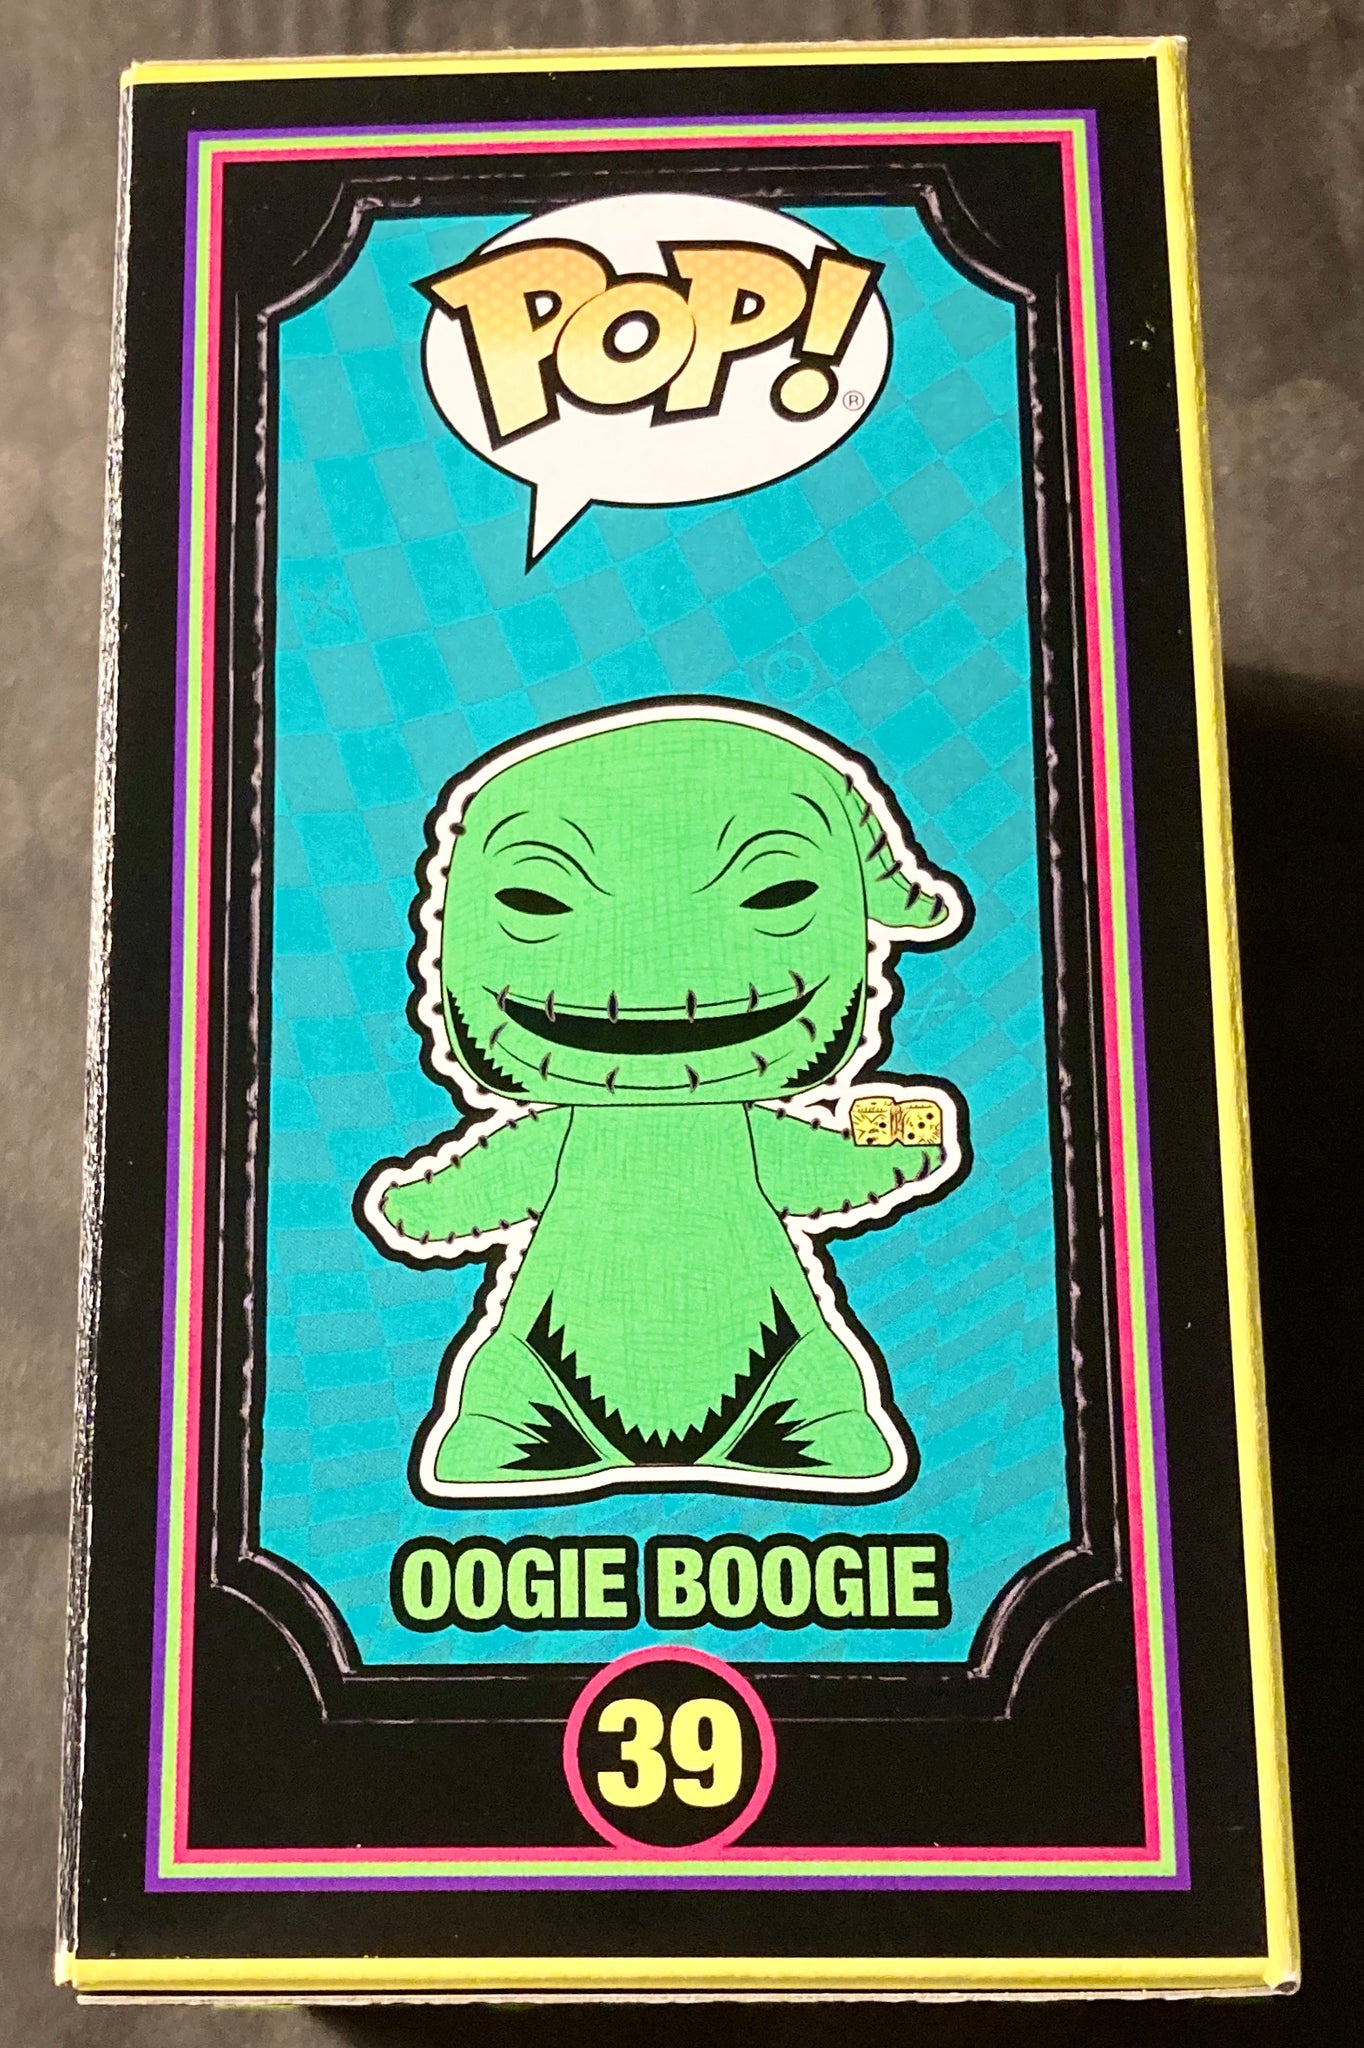 OOGIE BOOGIE-NIGHTMARE BEFORE CHRISTMAS REACTION W2 – Academy Museum Store